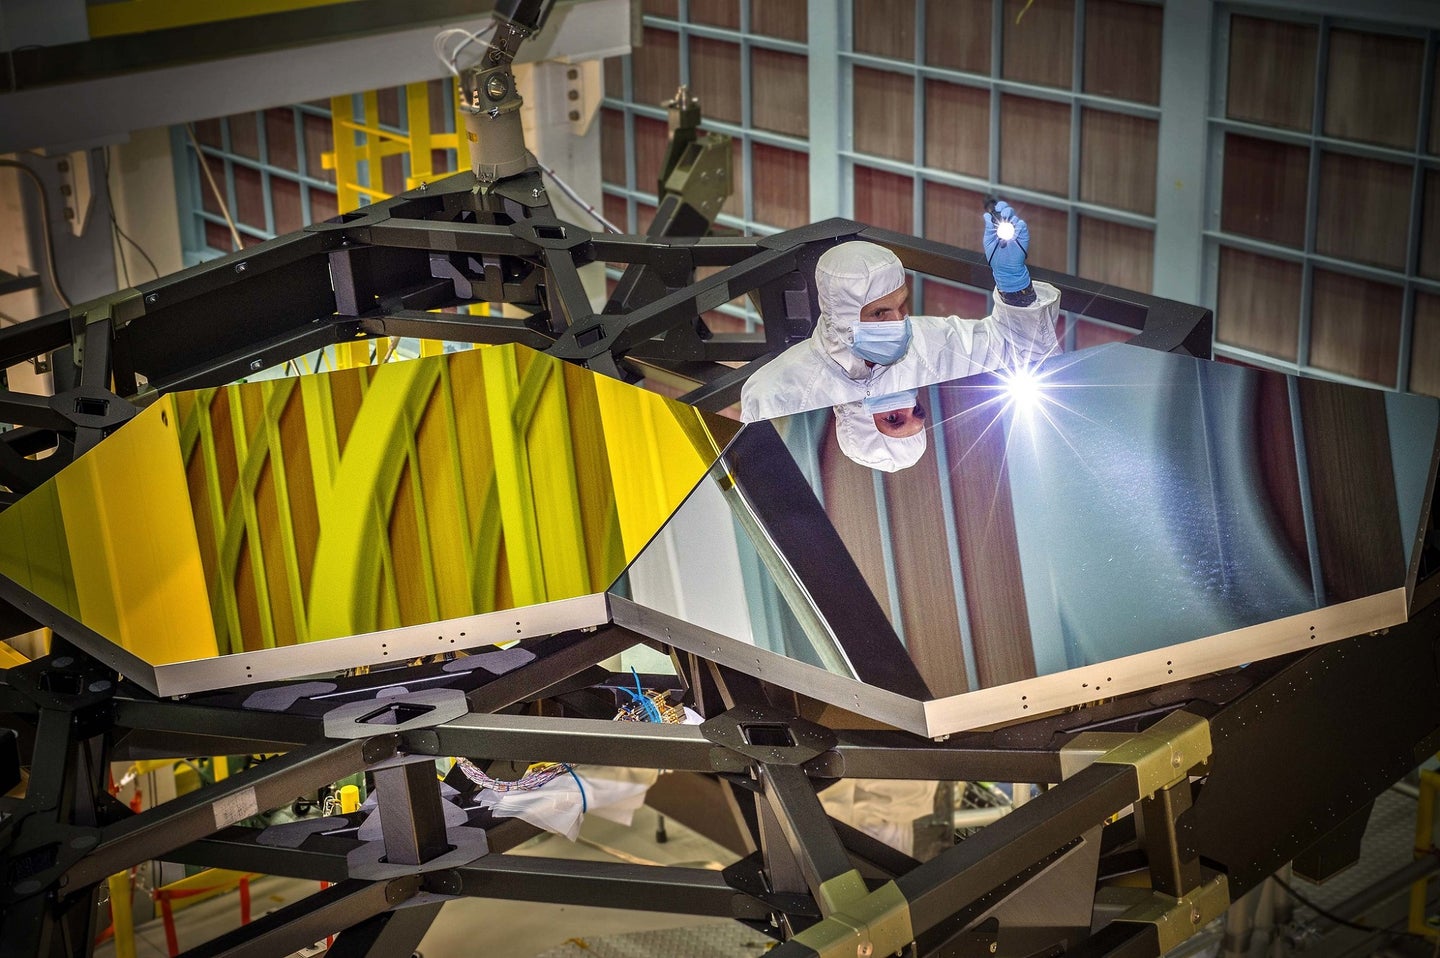 NASA James Webb Space Telescope's primary mirror segments, shaped as hexagons and coated in gold, being inspected by an engineer prior to launch